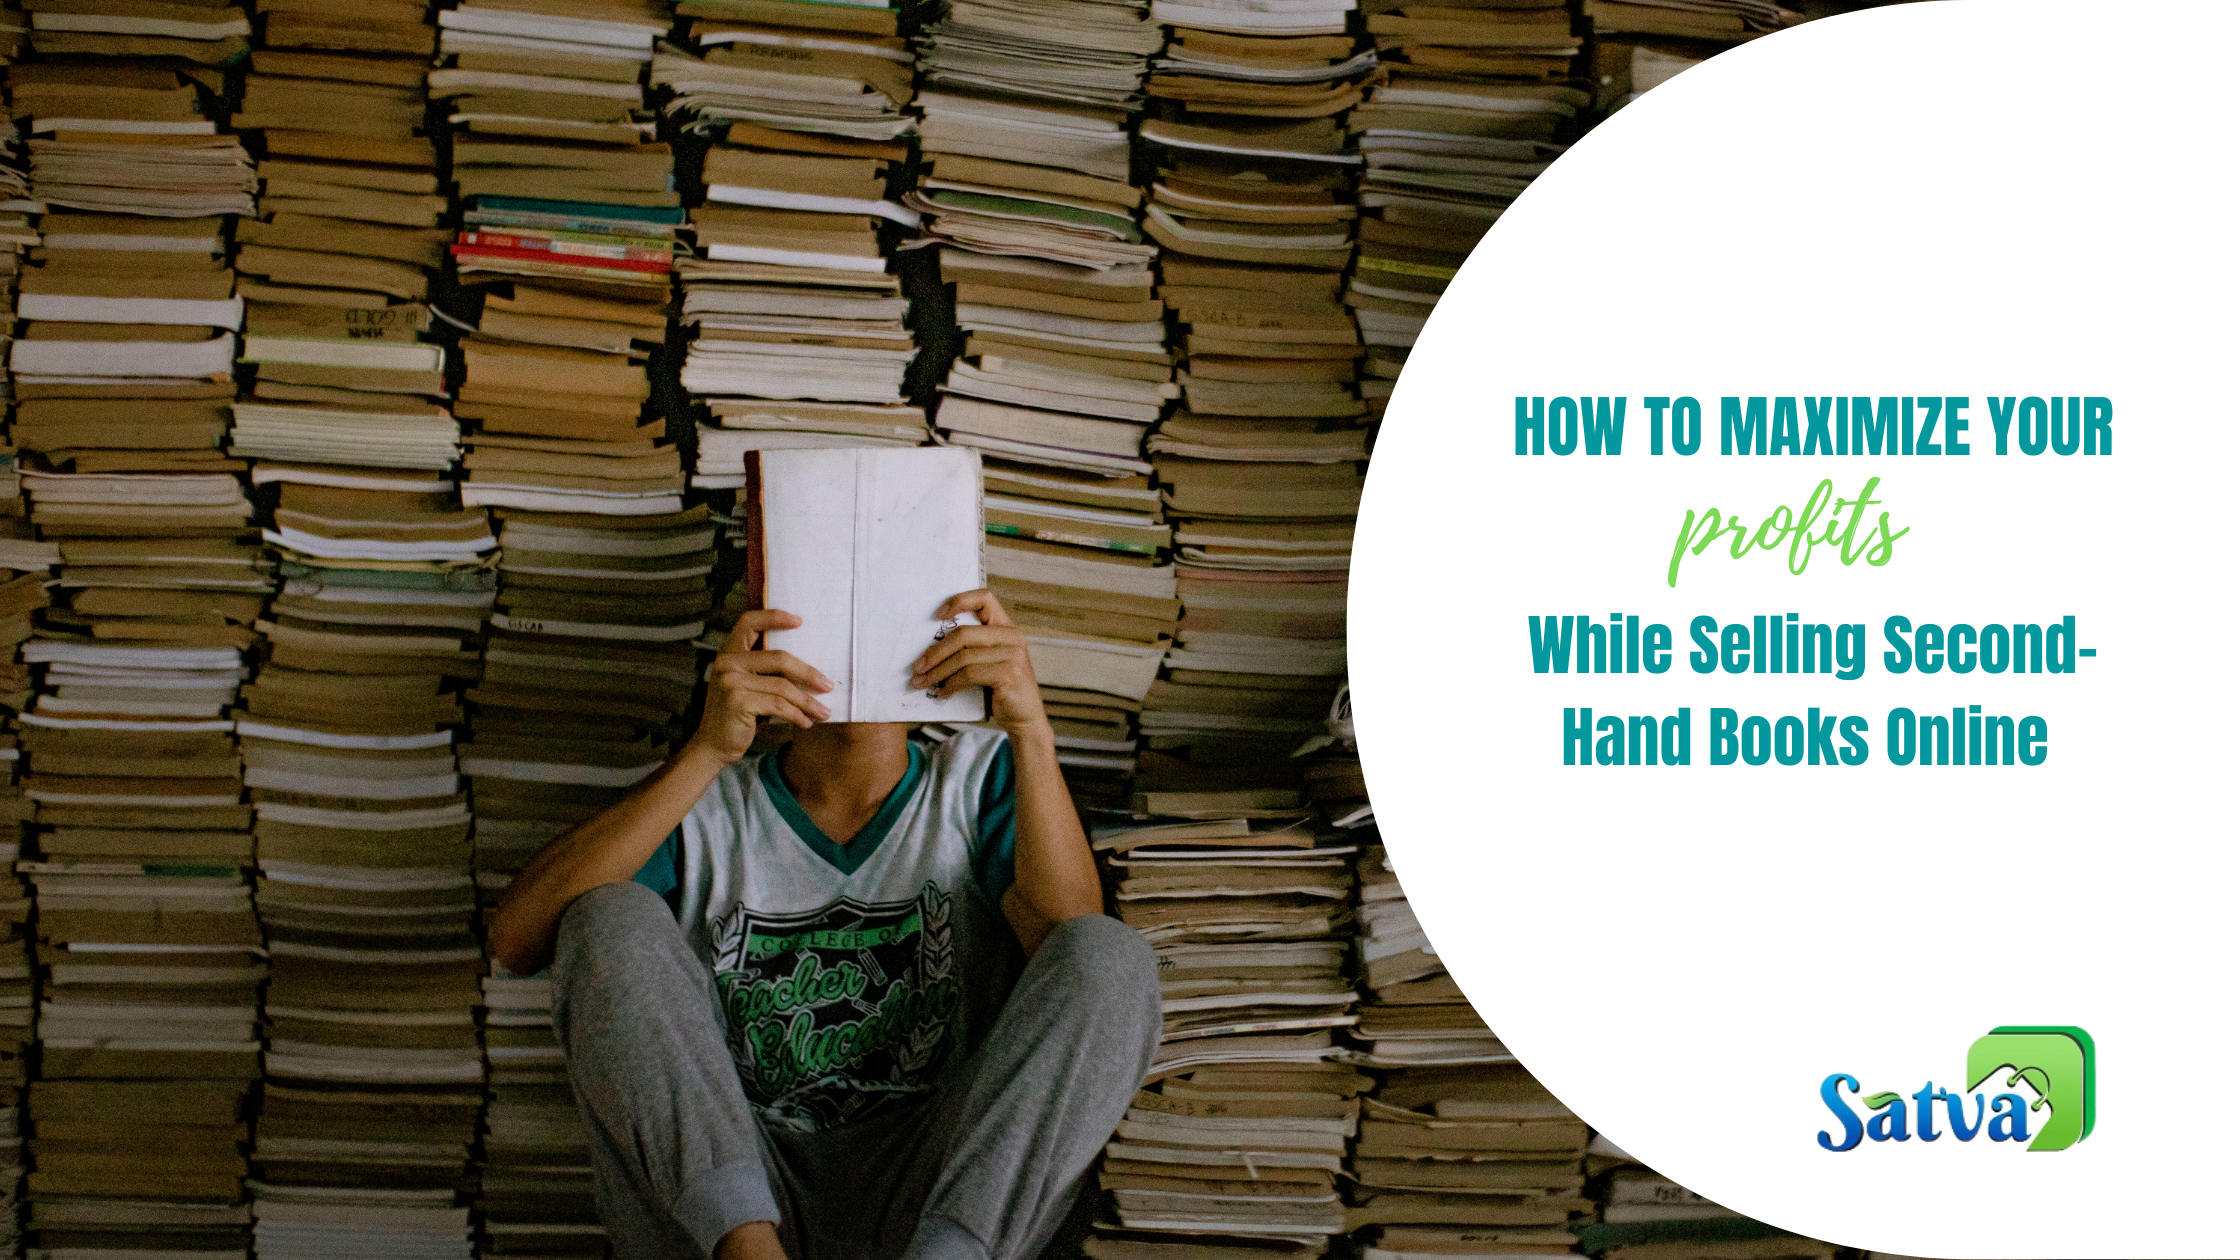 Learn how to maximize your profits while selling second-hand books online with tips on researching the market, pricing, bundling, social media, and using Satva Online Pvt Ltd.